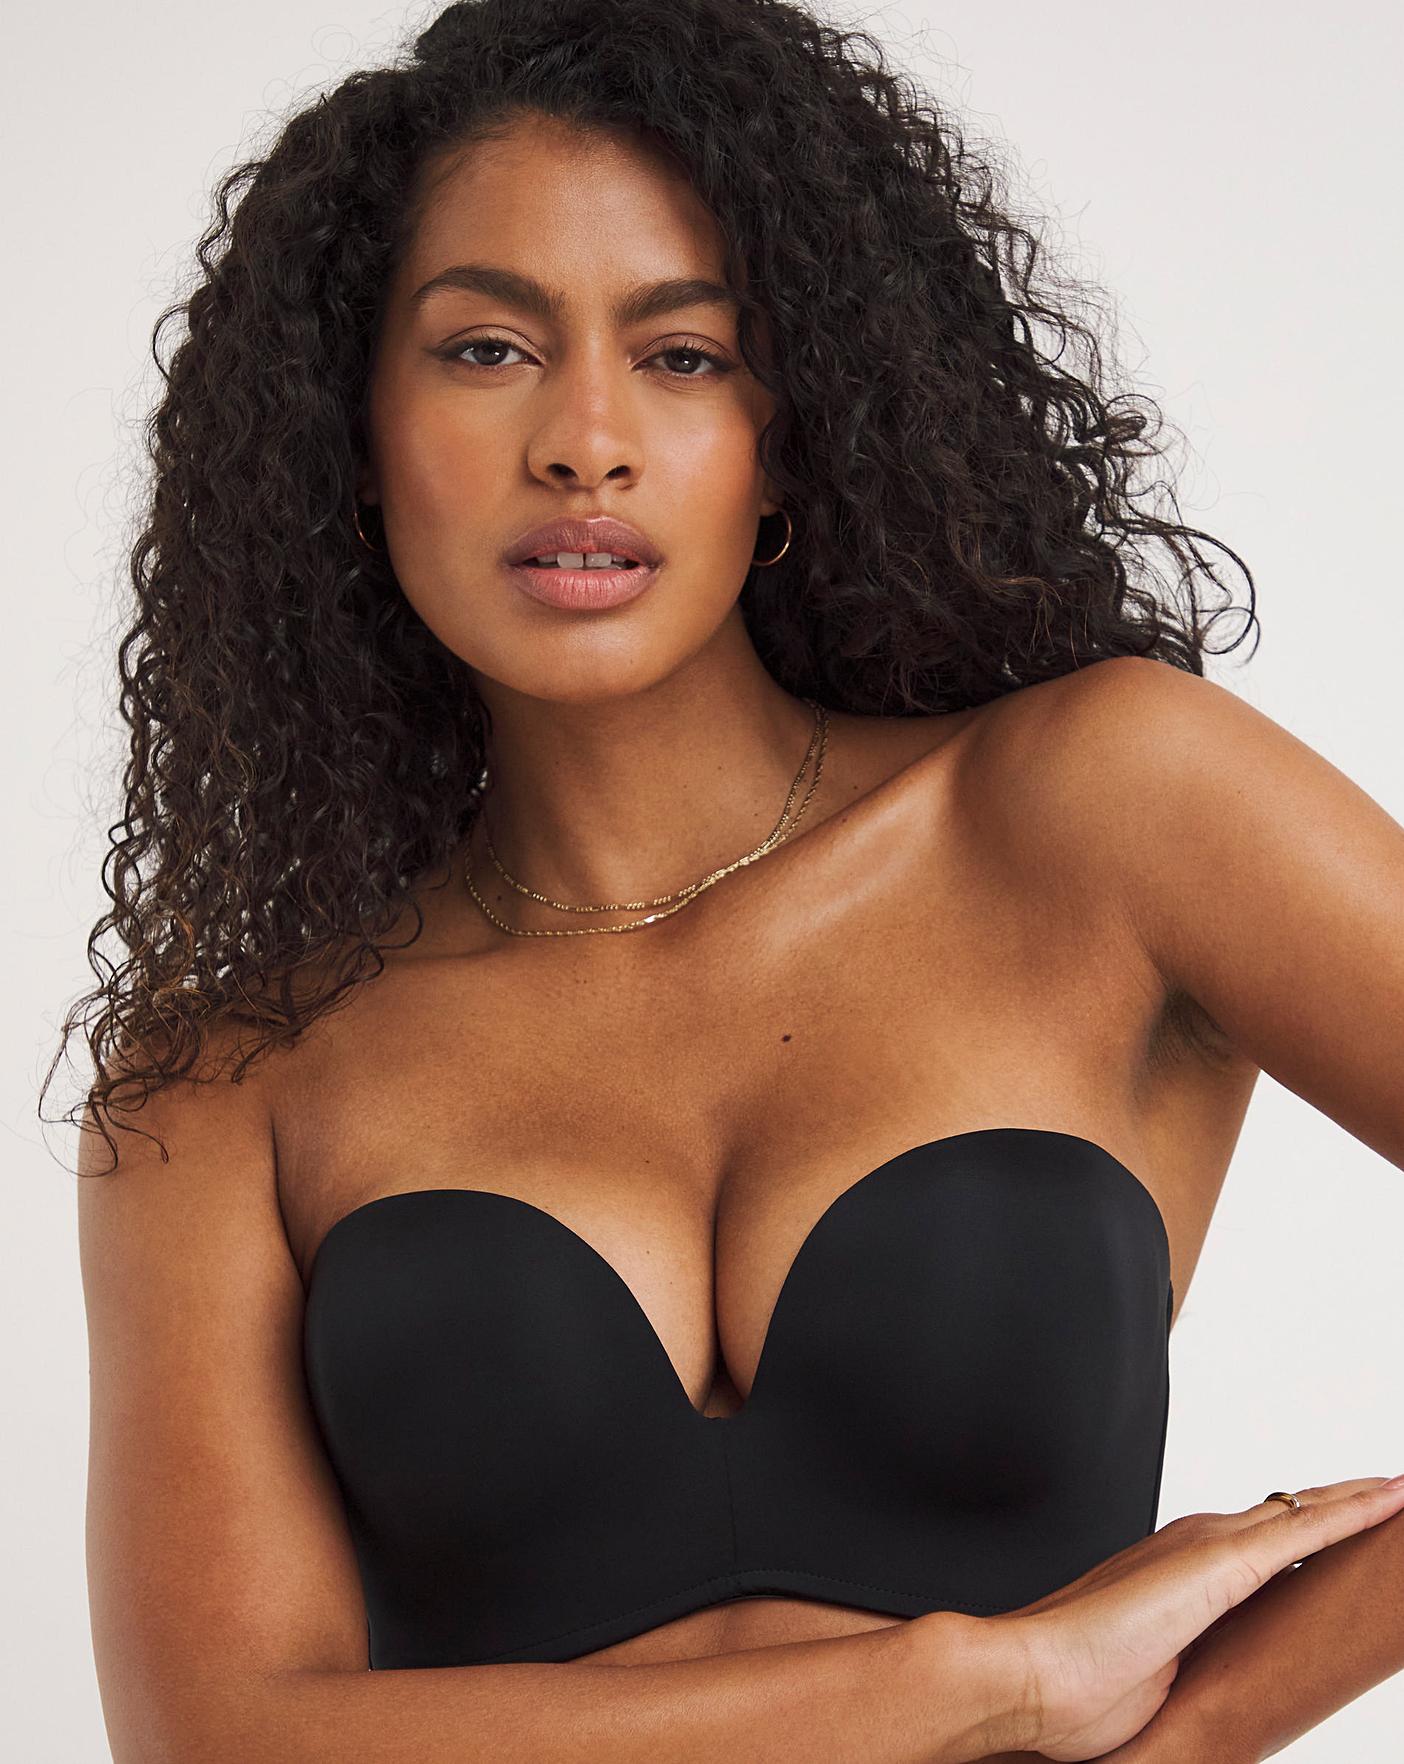 My UK My Recent Tracking Black Strapless Dress Supportive Bras